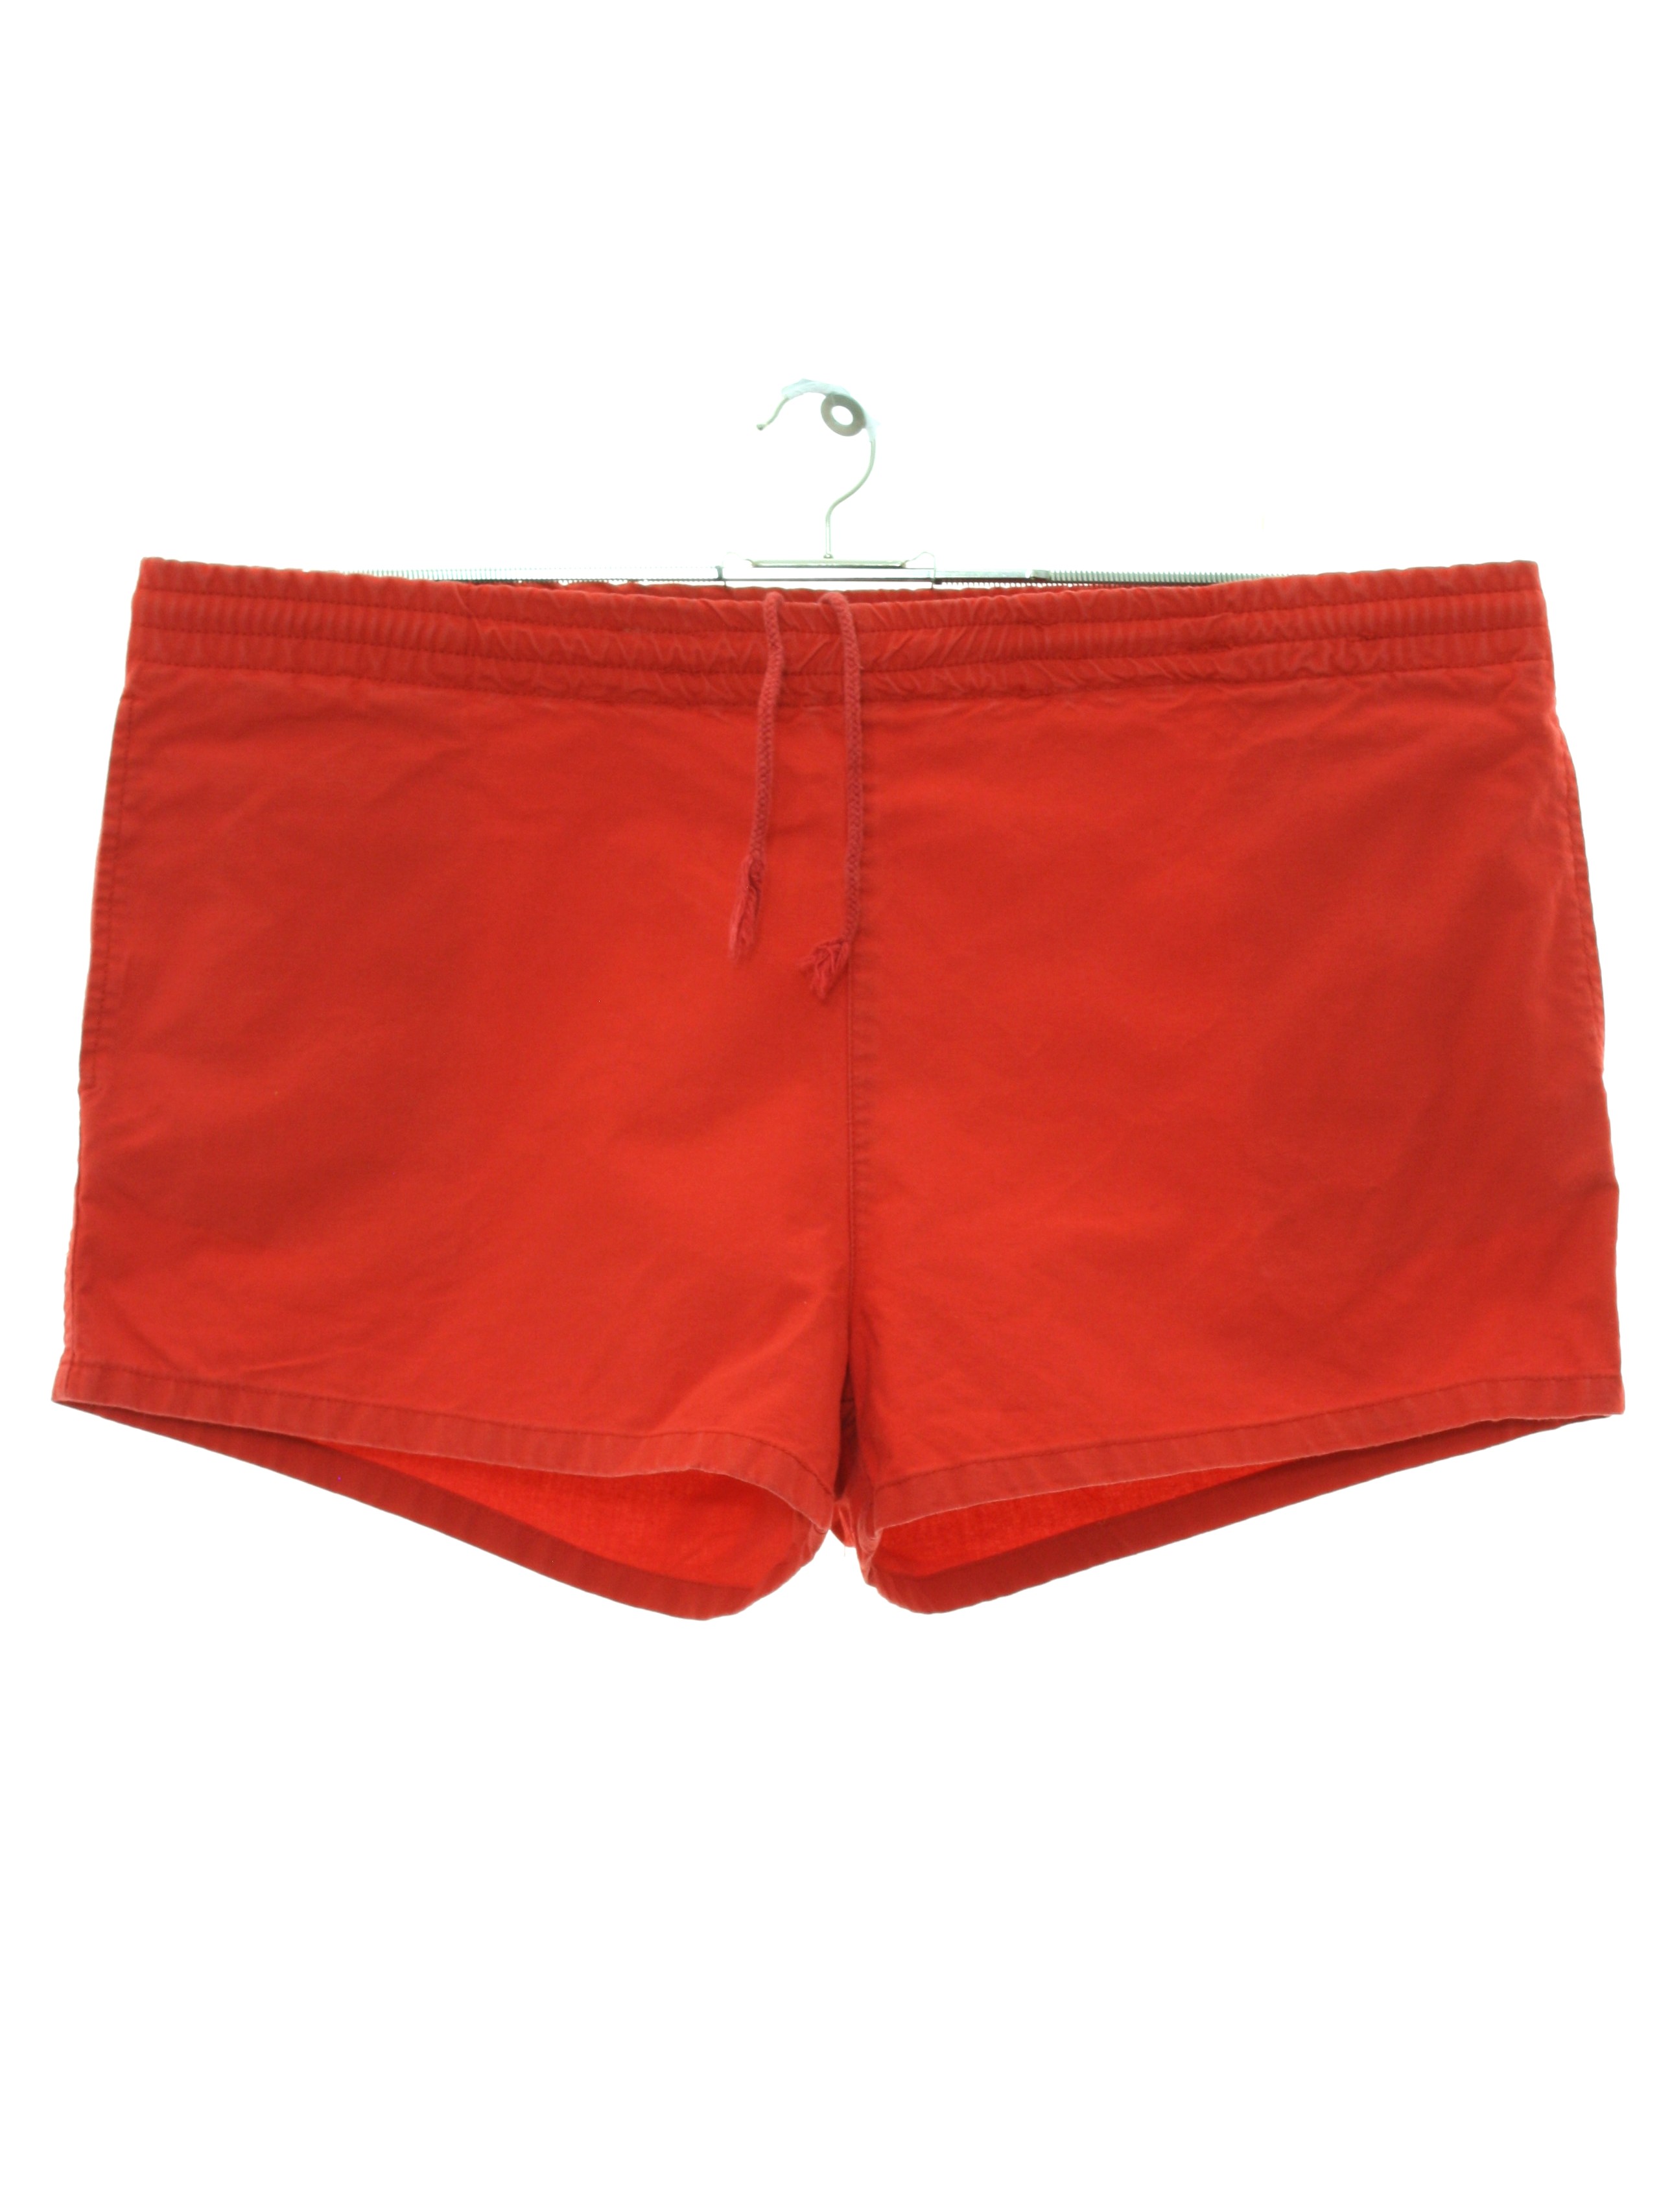 Eighties Vintage Shorts: 80s -Independently Basic- Mens red background ...